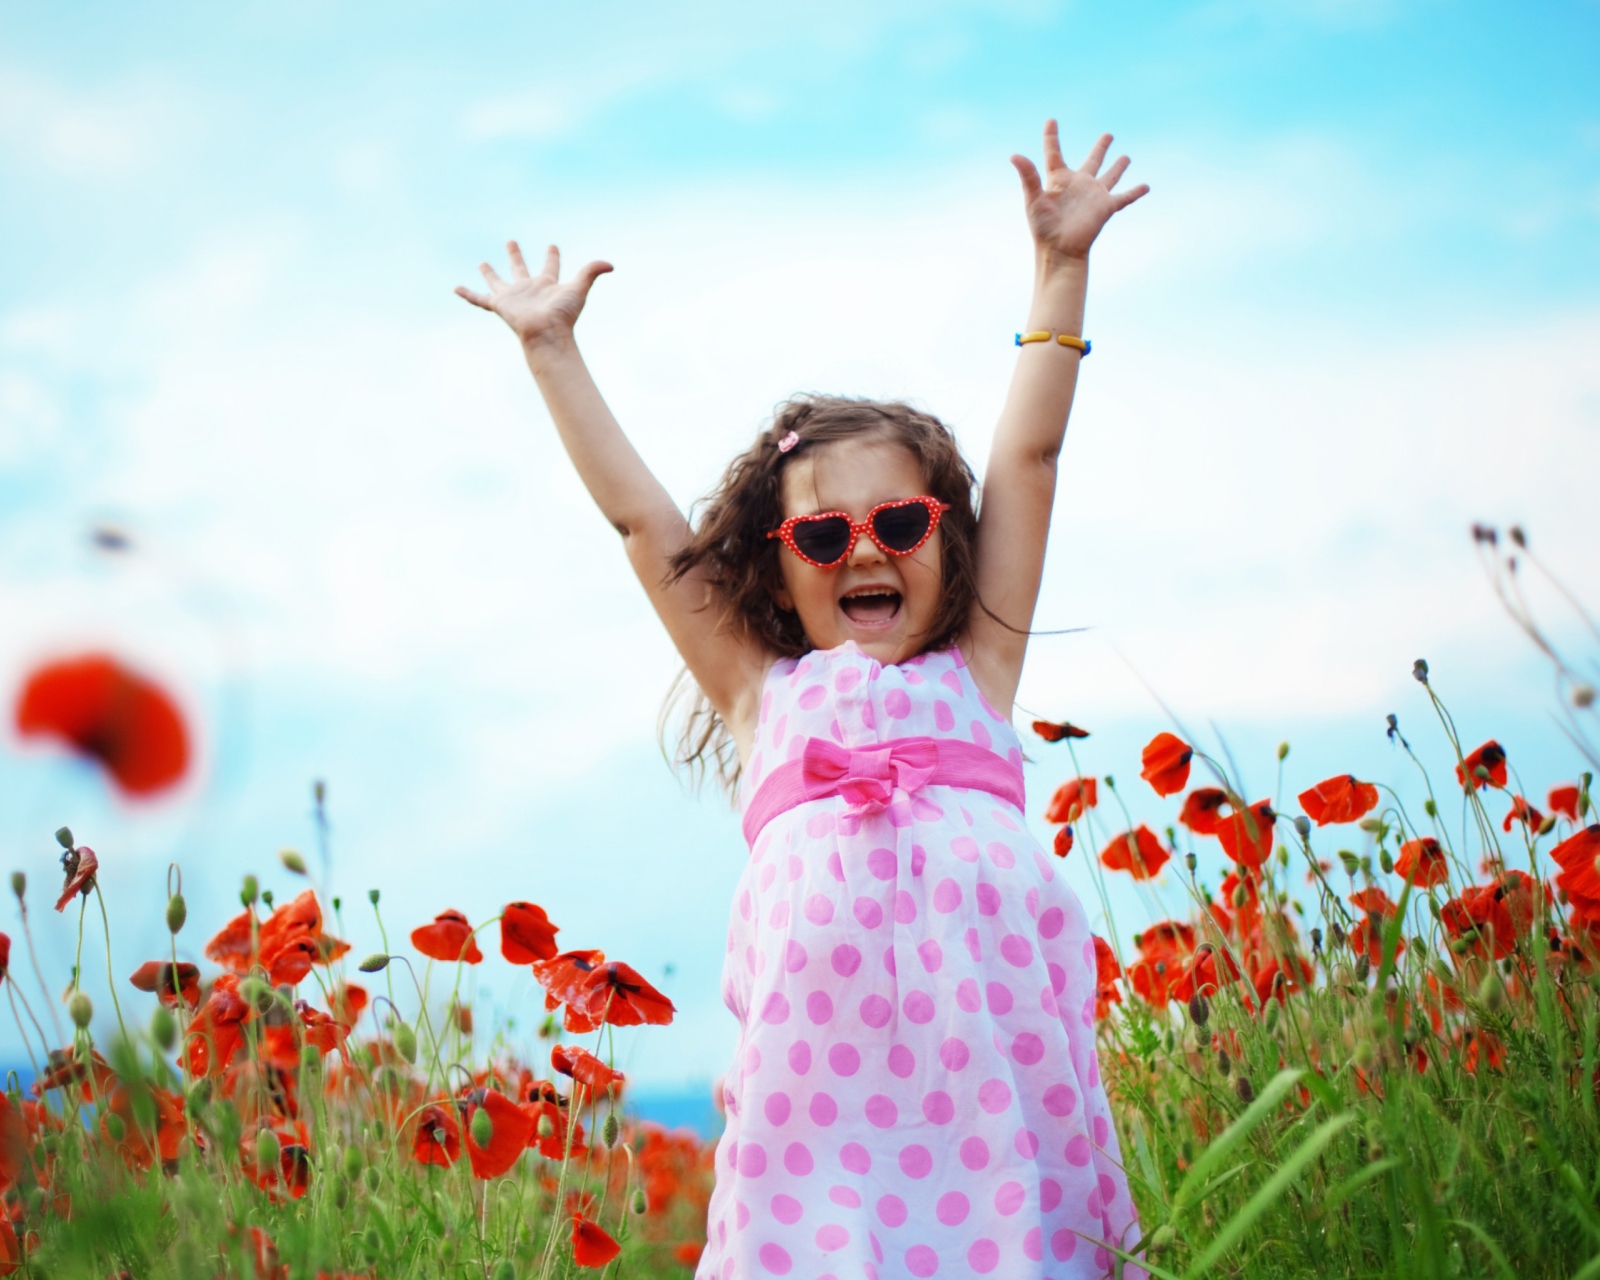 Happy Little Girl In Love With Life wallpaper 1600x1280